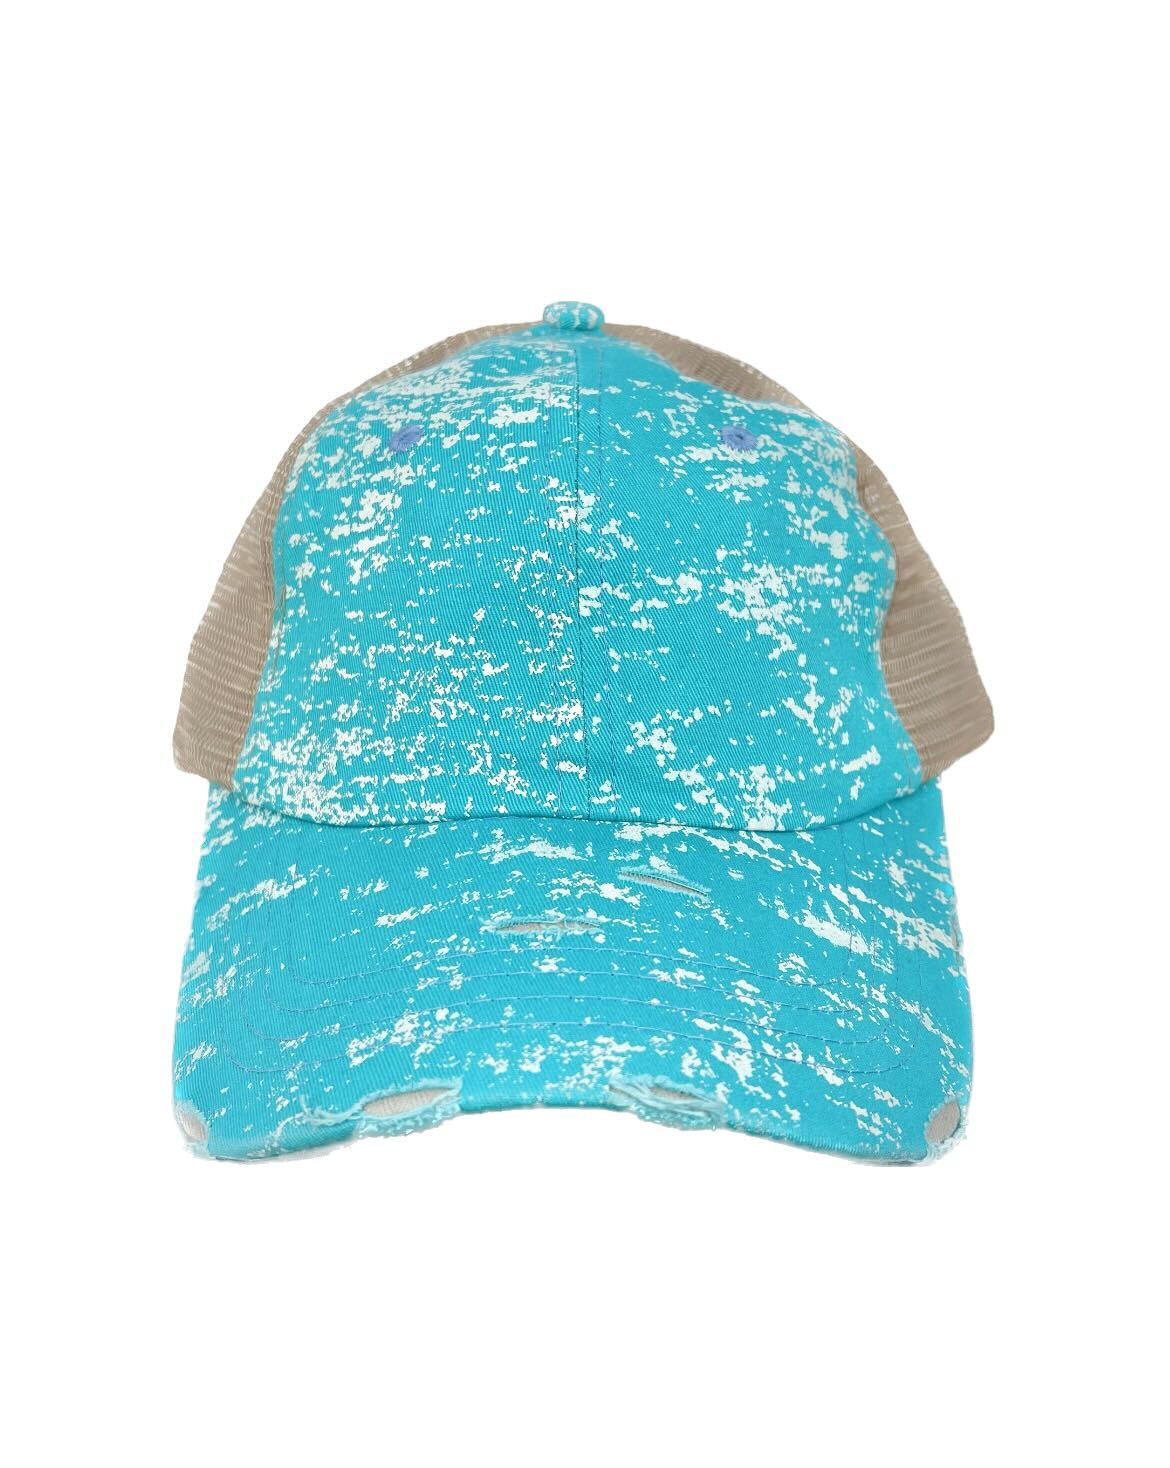 Turquoise Spatter Hat with Mesh